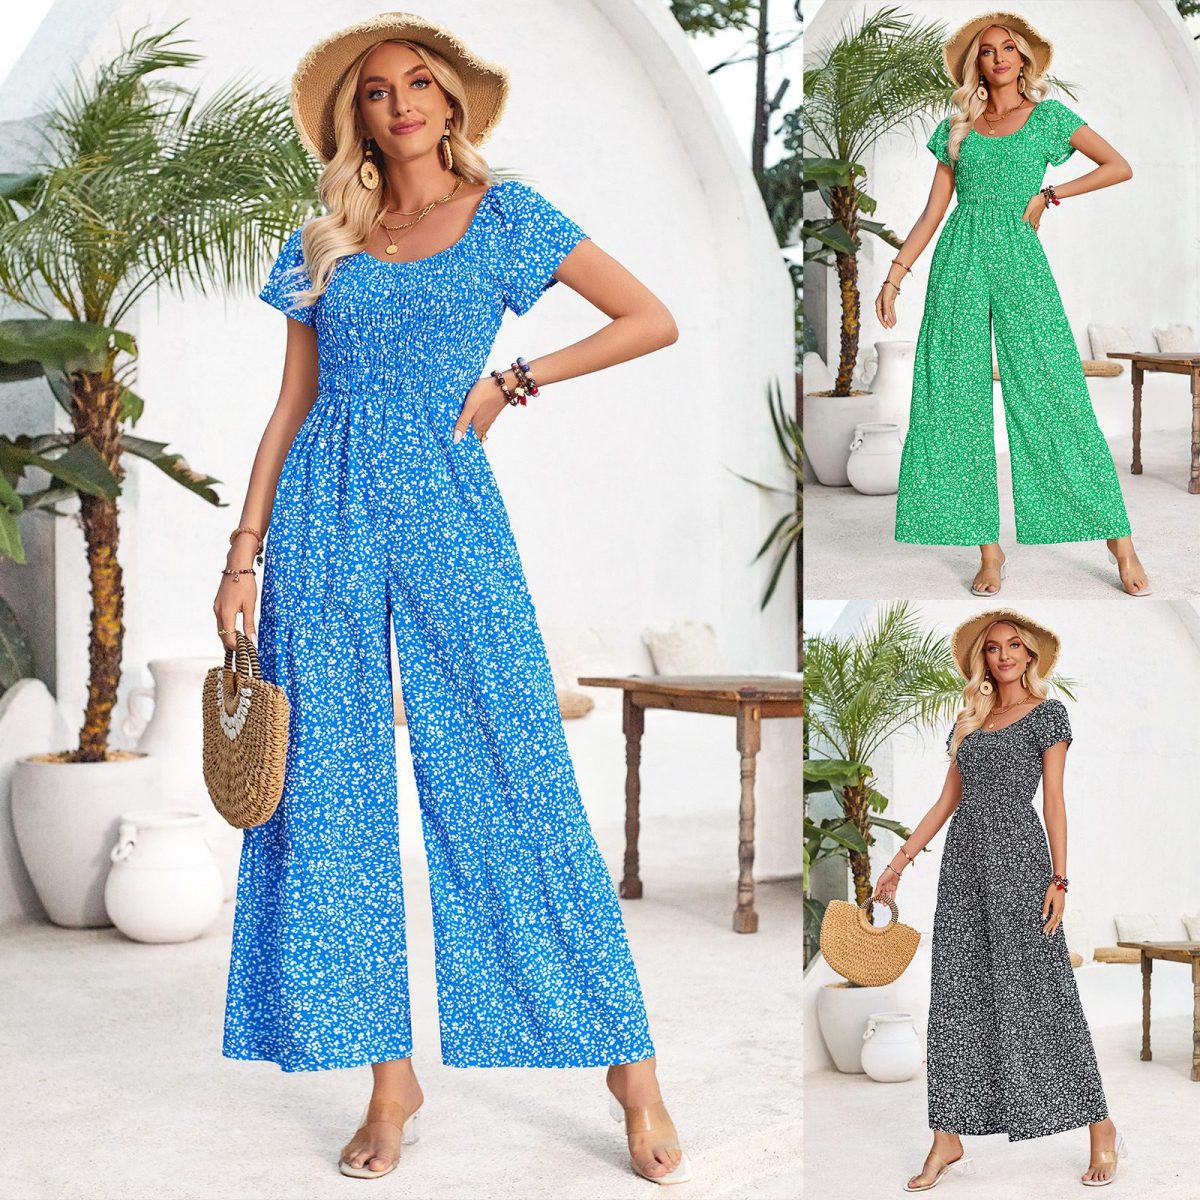 Printed Round Neck Smocking Jumpsuit in Jumpsuits & Rompers